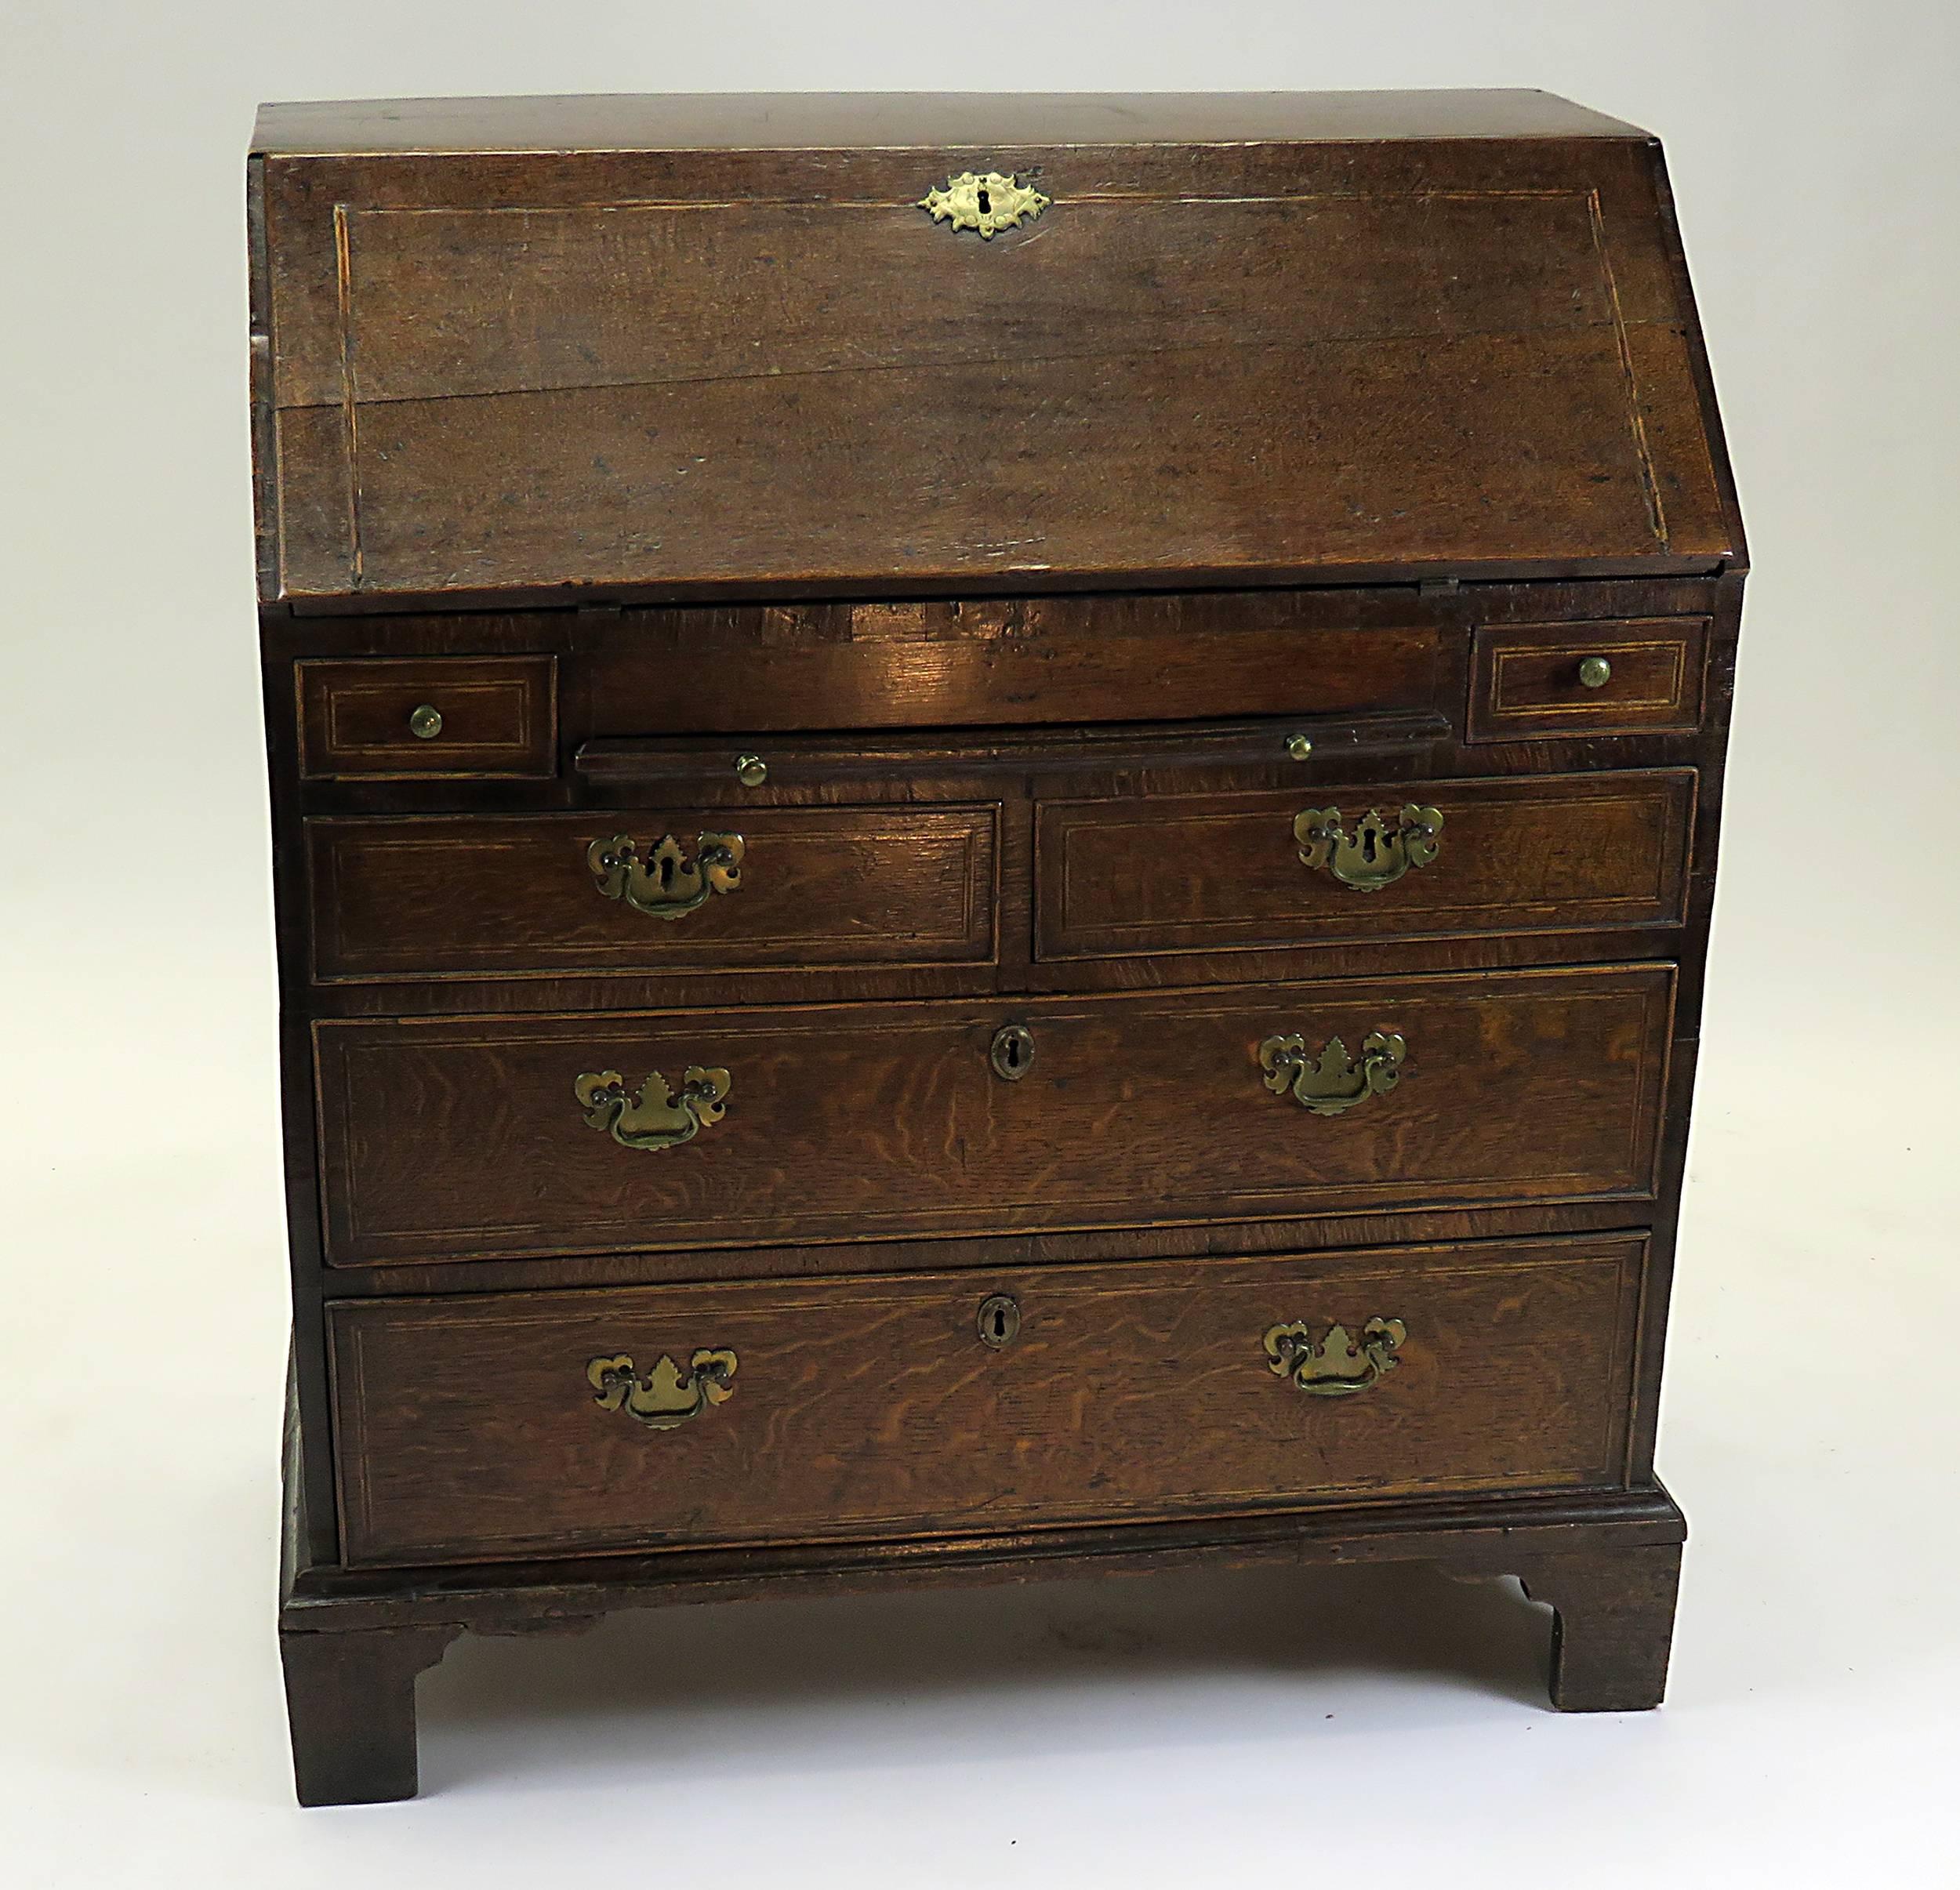 A handsome and rustic early Georgian oak slant front desk made in England during the first half of the 18th century. The interior is beautifully fitted with pigeon holes and stair stepped drawers. There is also a 